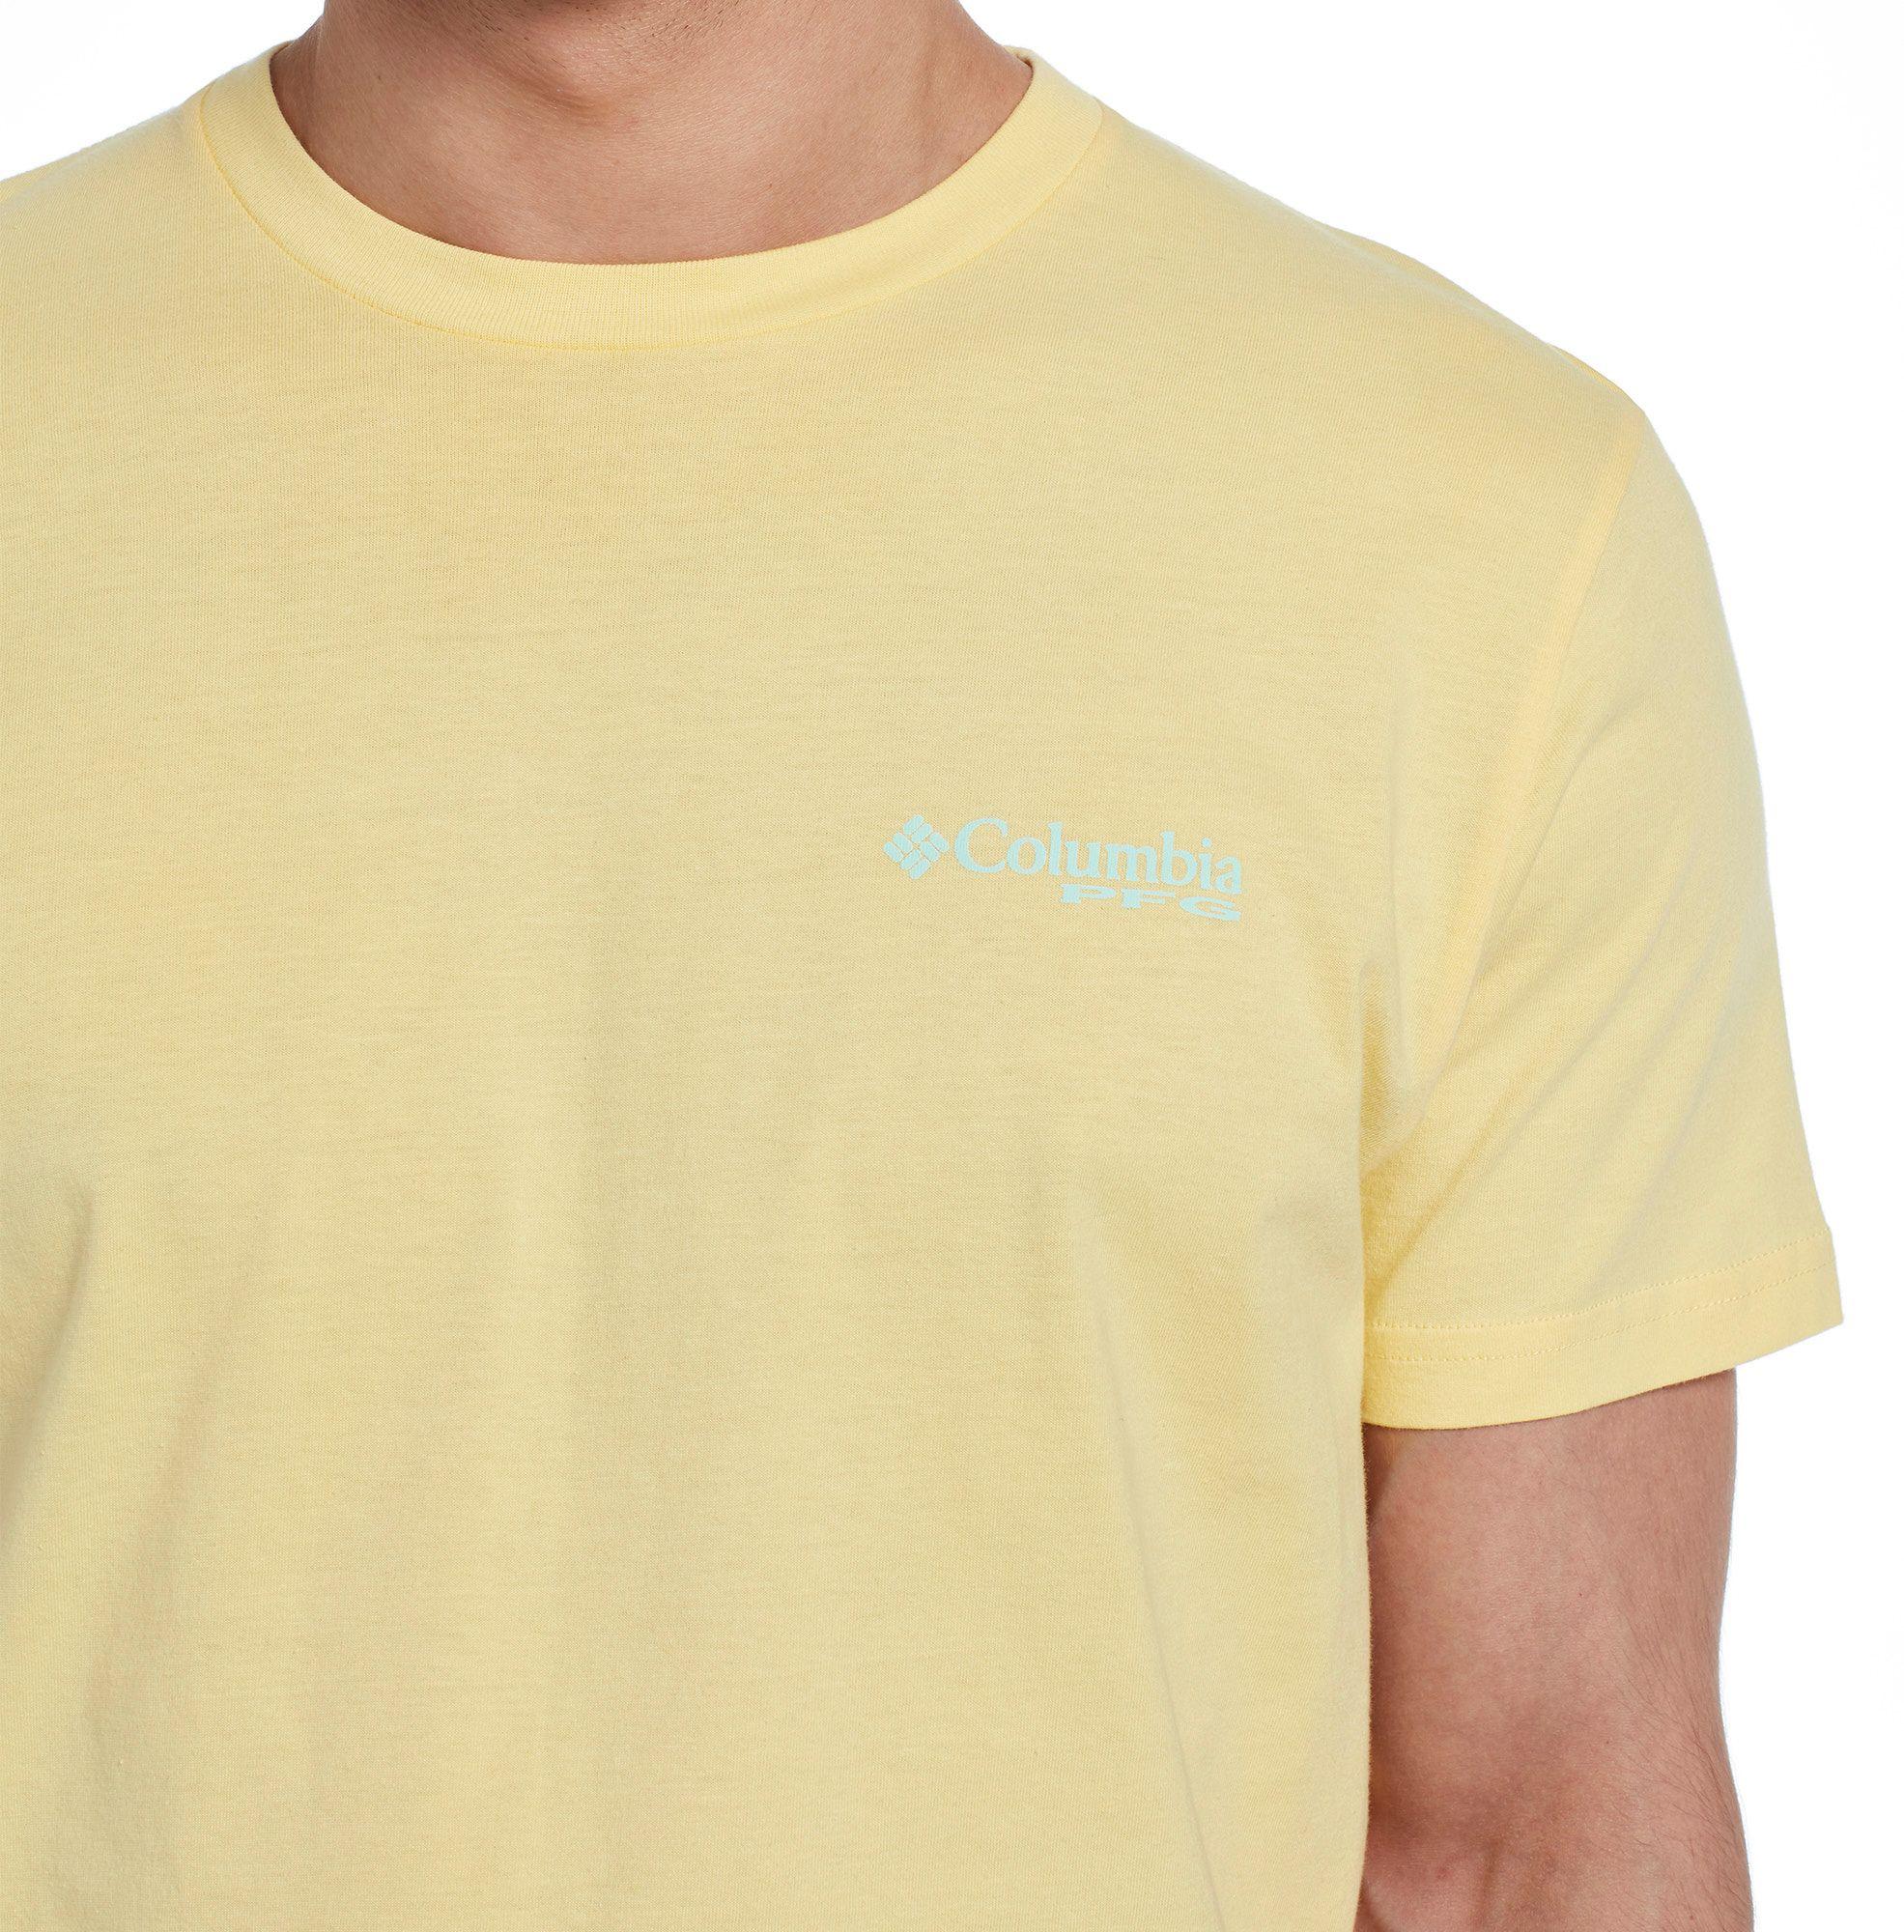 Columbia Cotton Pfg Triangle T-shirt in Yellow for Men - Lyst